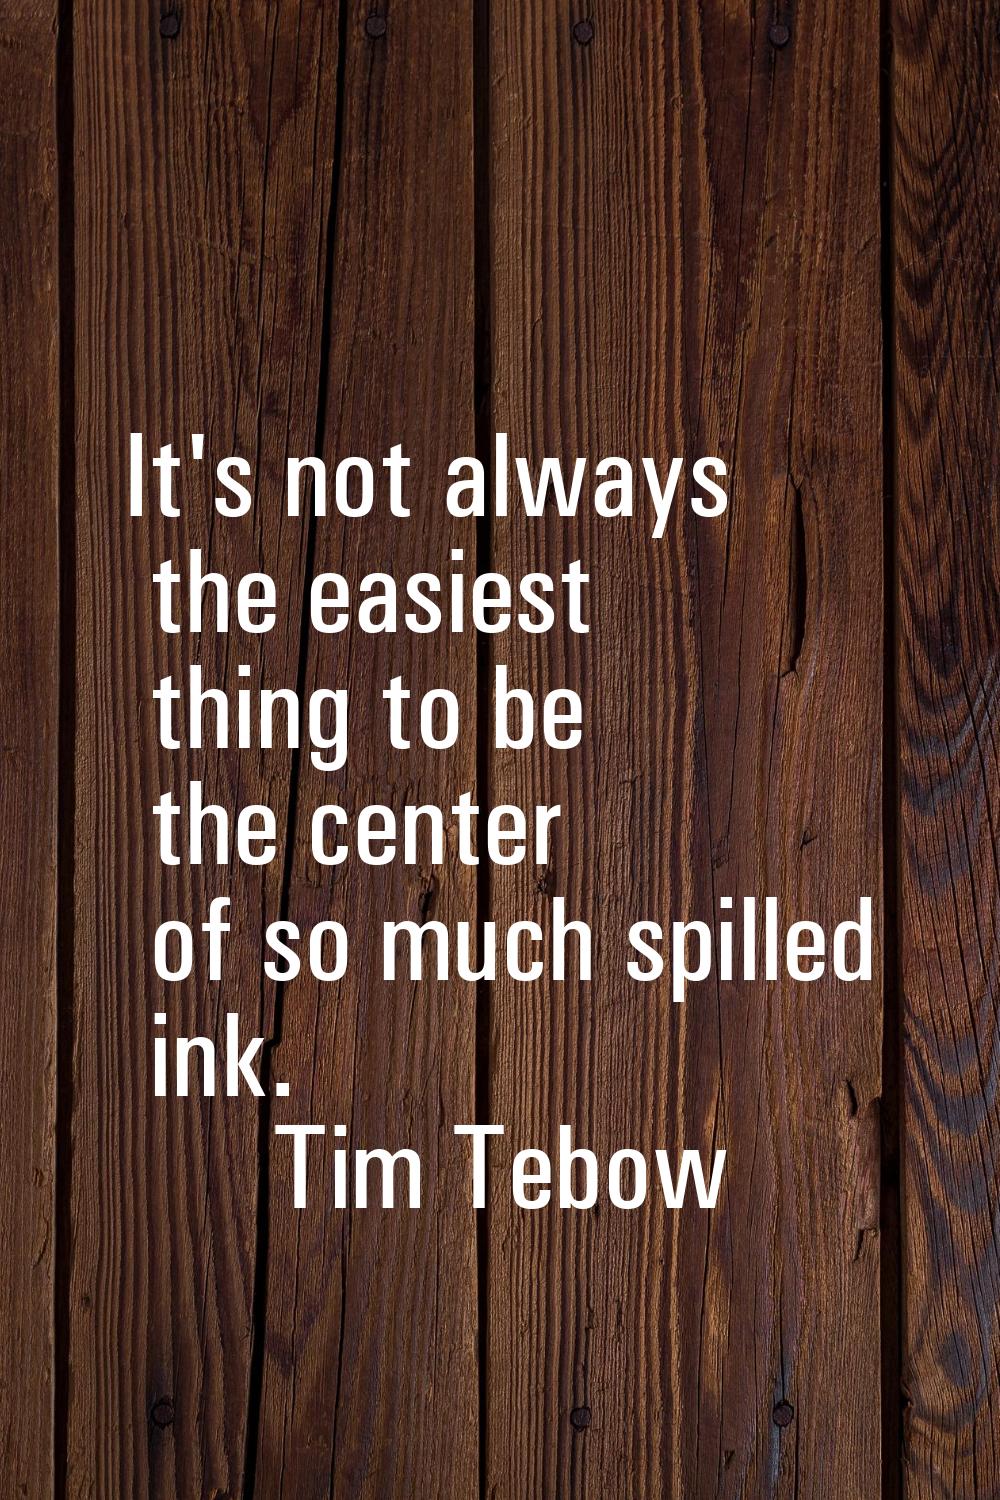 It's not always the easiest thing to be the center of so much spilled ink.